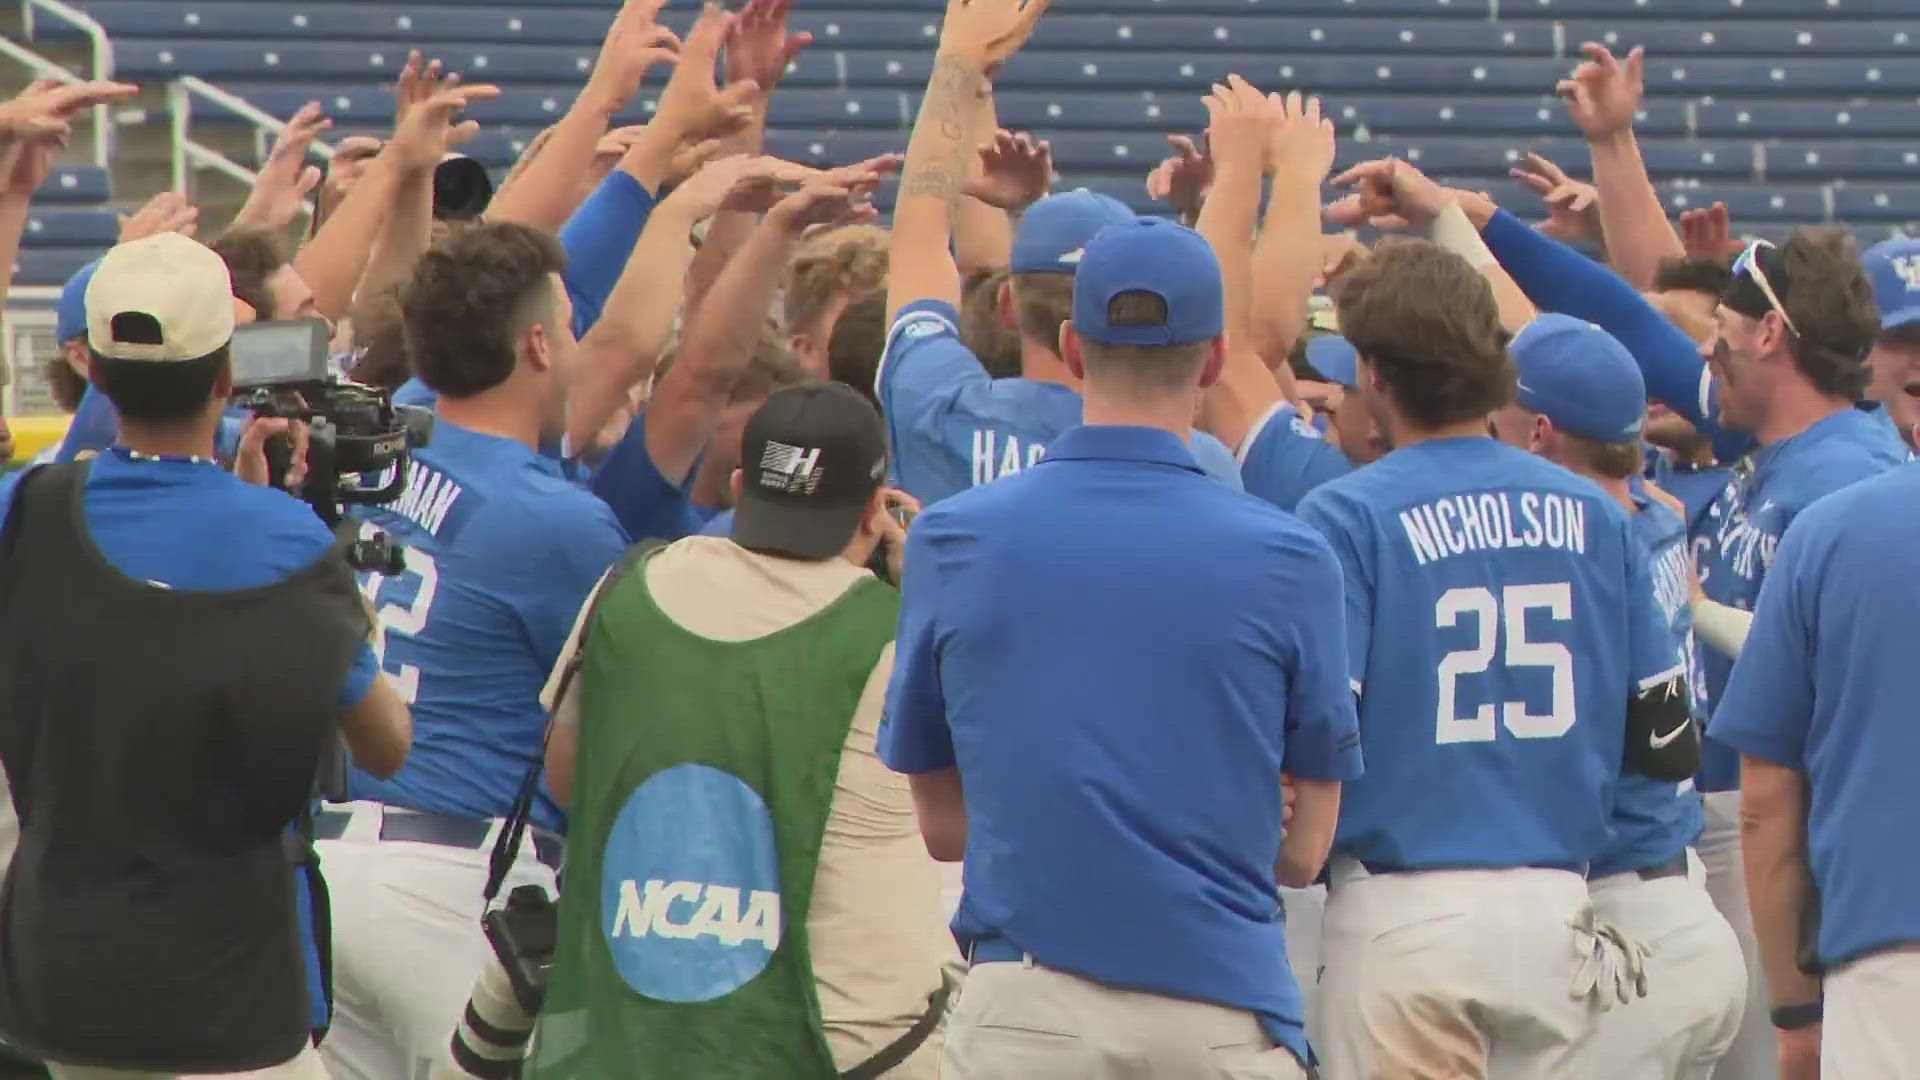 UK (46-14), in its first CWS, set a program record for wins in a season and will play Monday night against the winner of Saturday night's Florida-Texas A&M matchup.